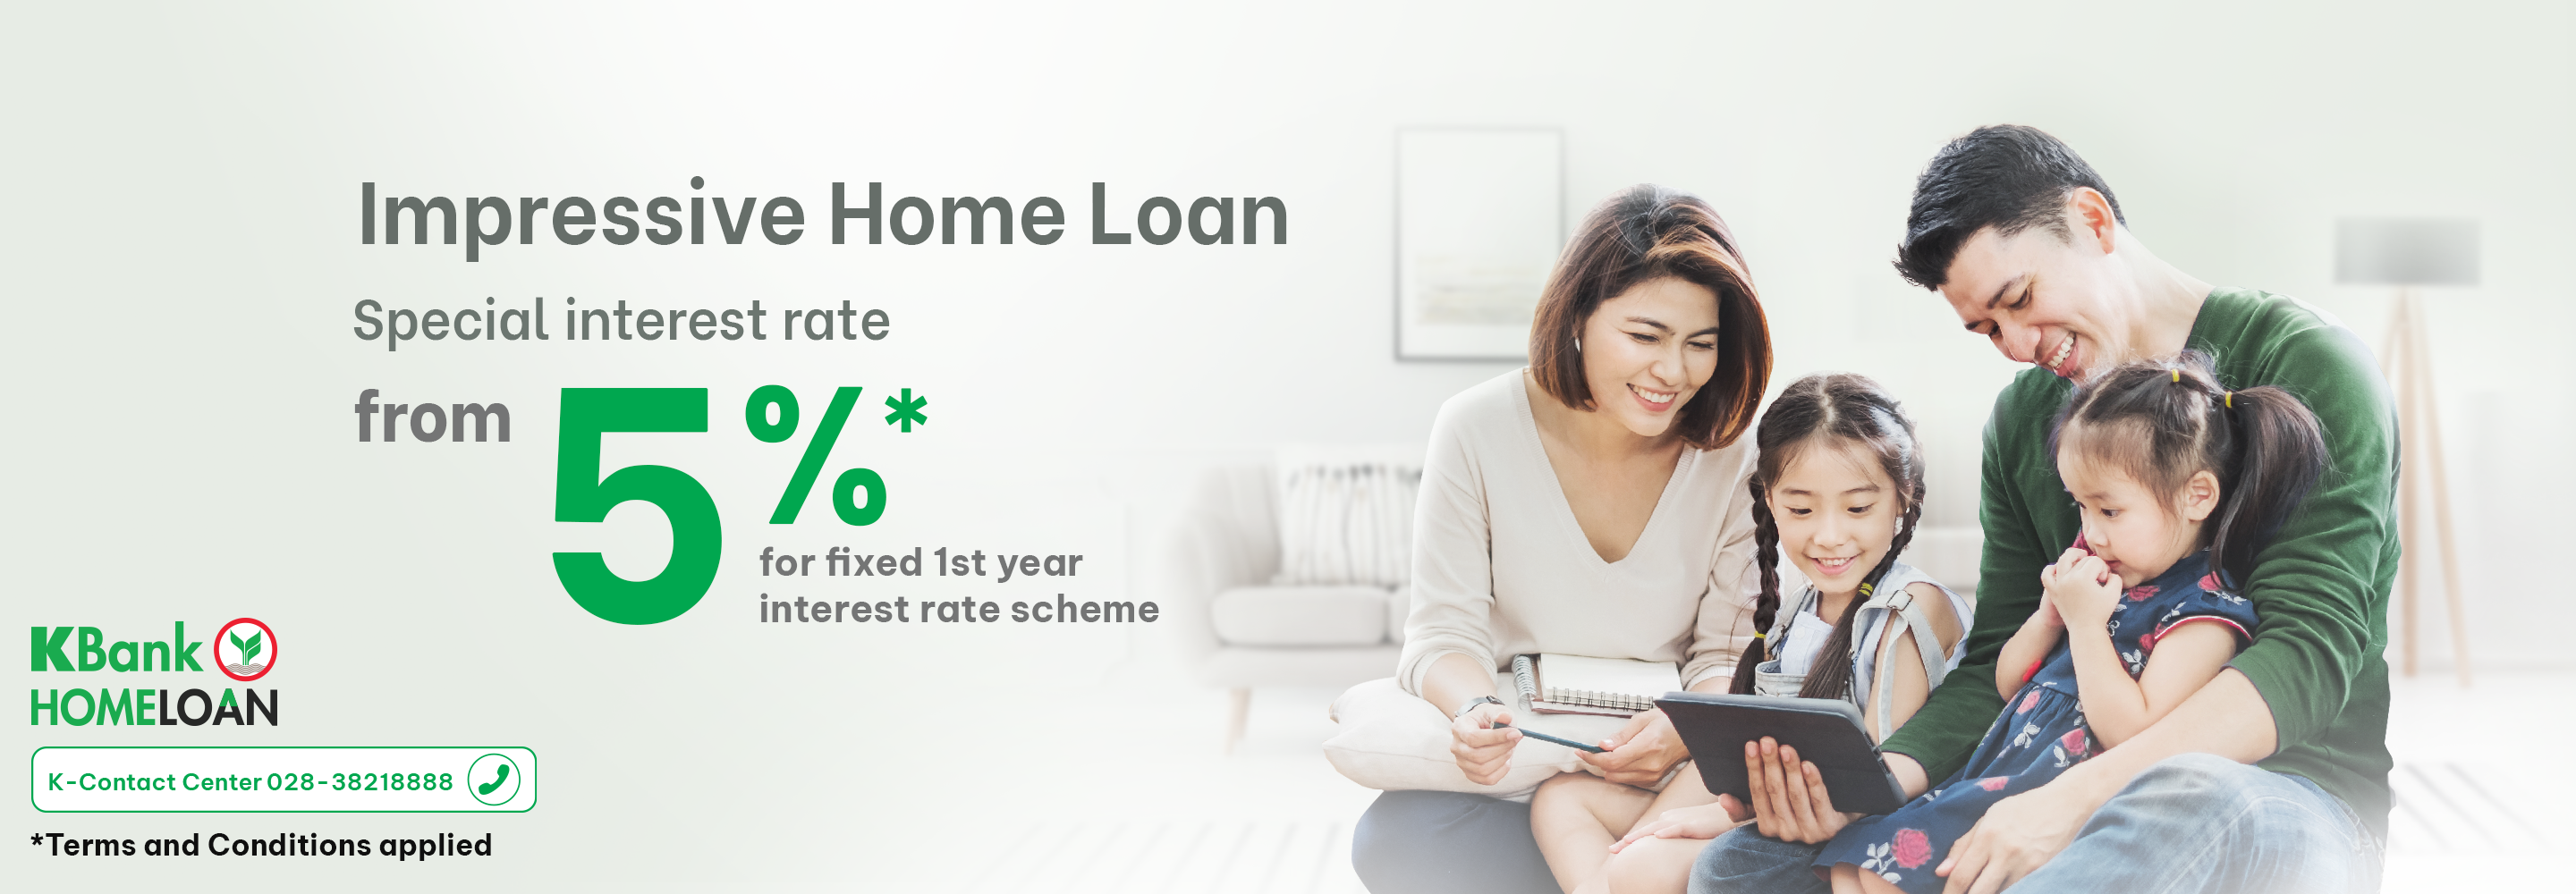 KBank-Home-Loan_2880x1000px 3.png